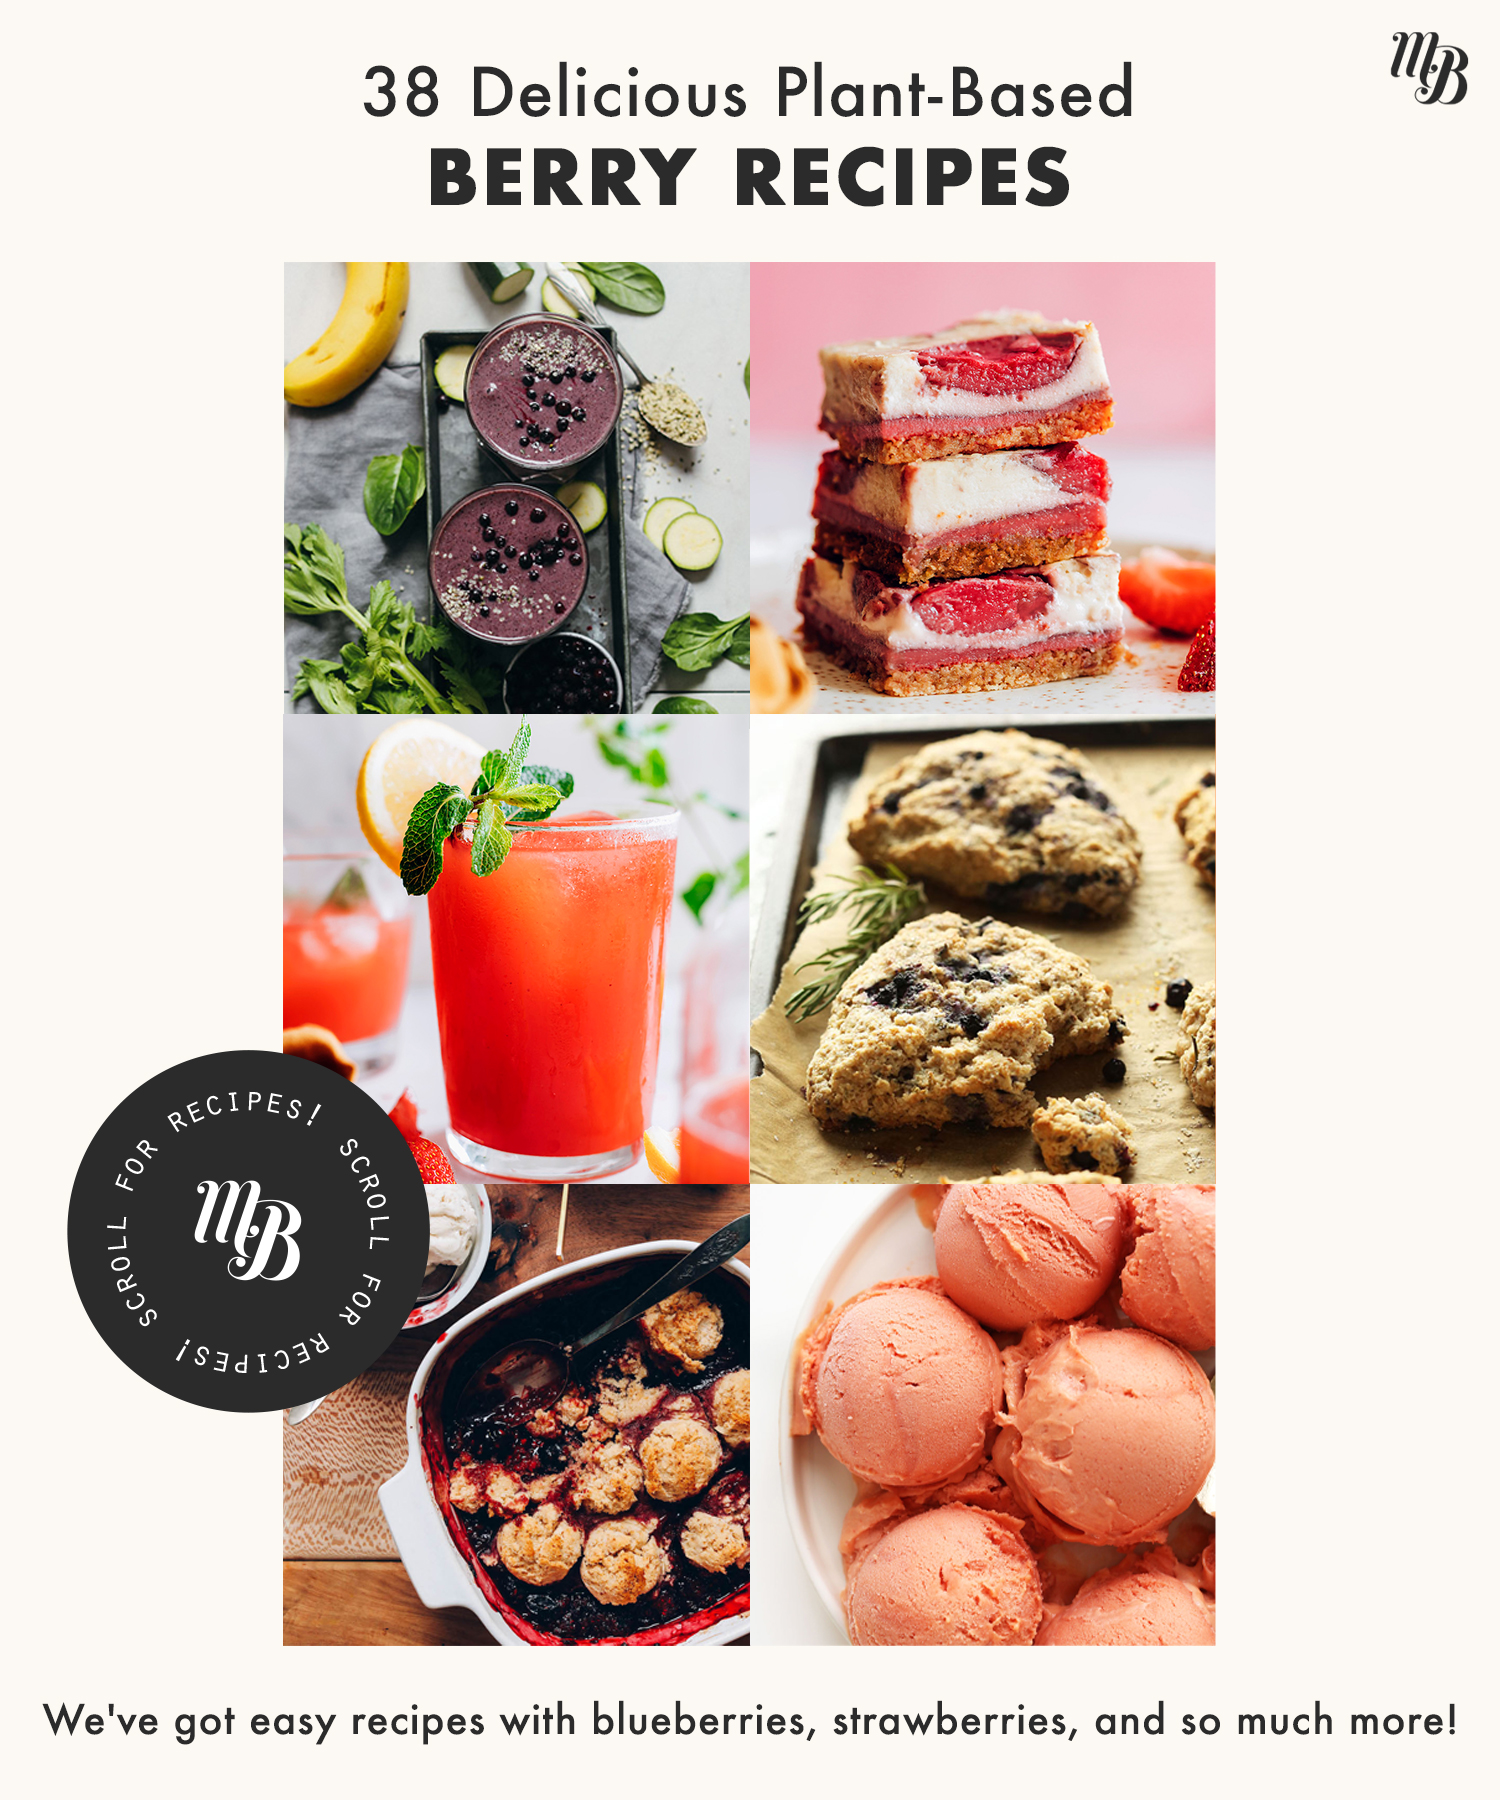 Assortment of plant-based berry recipes